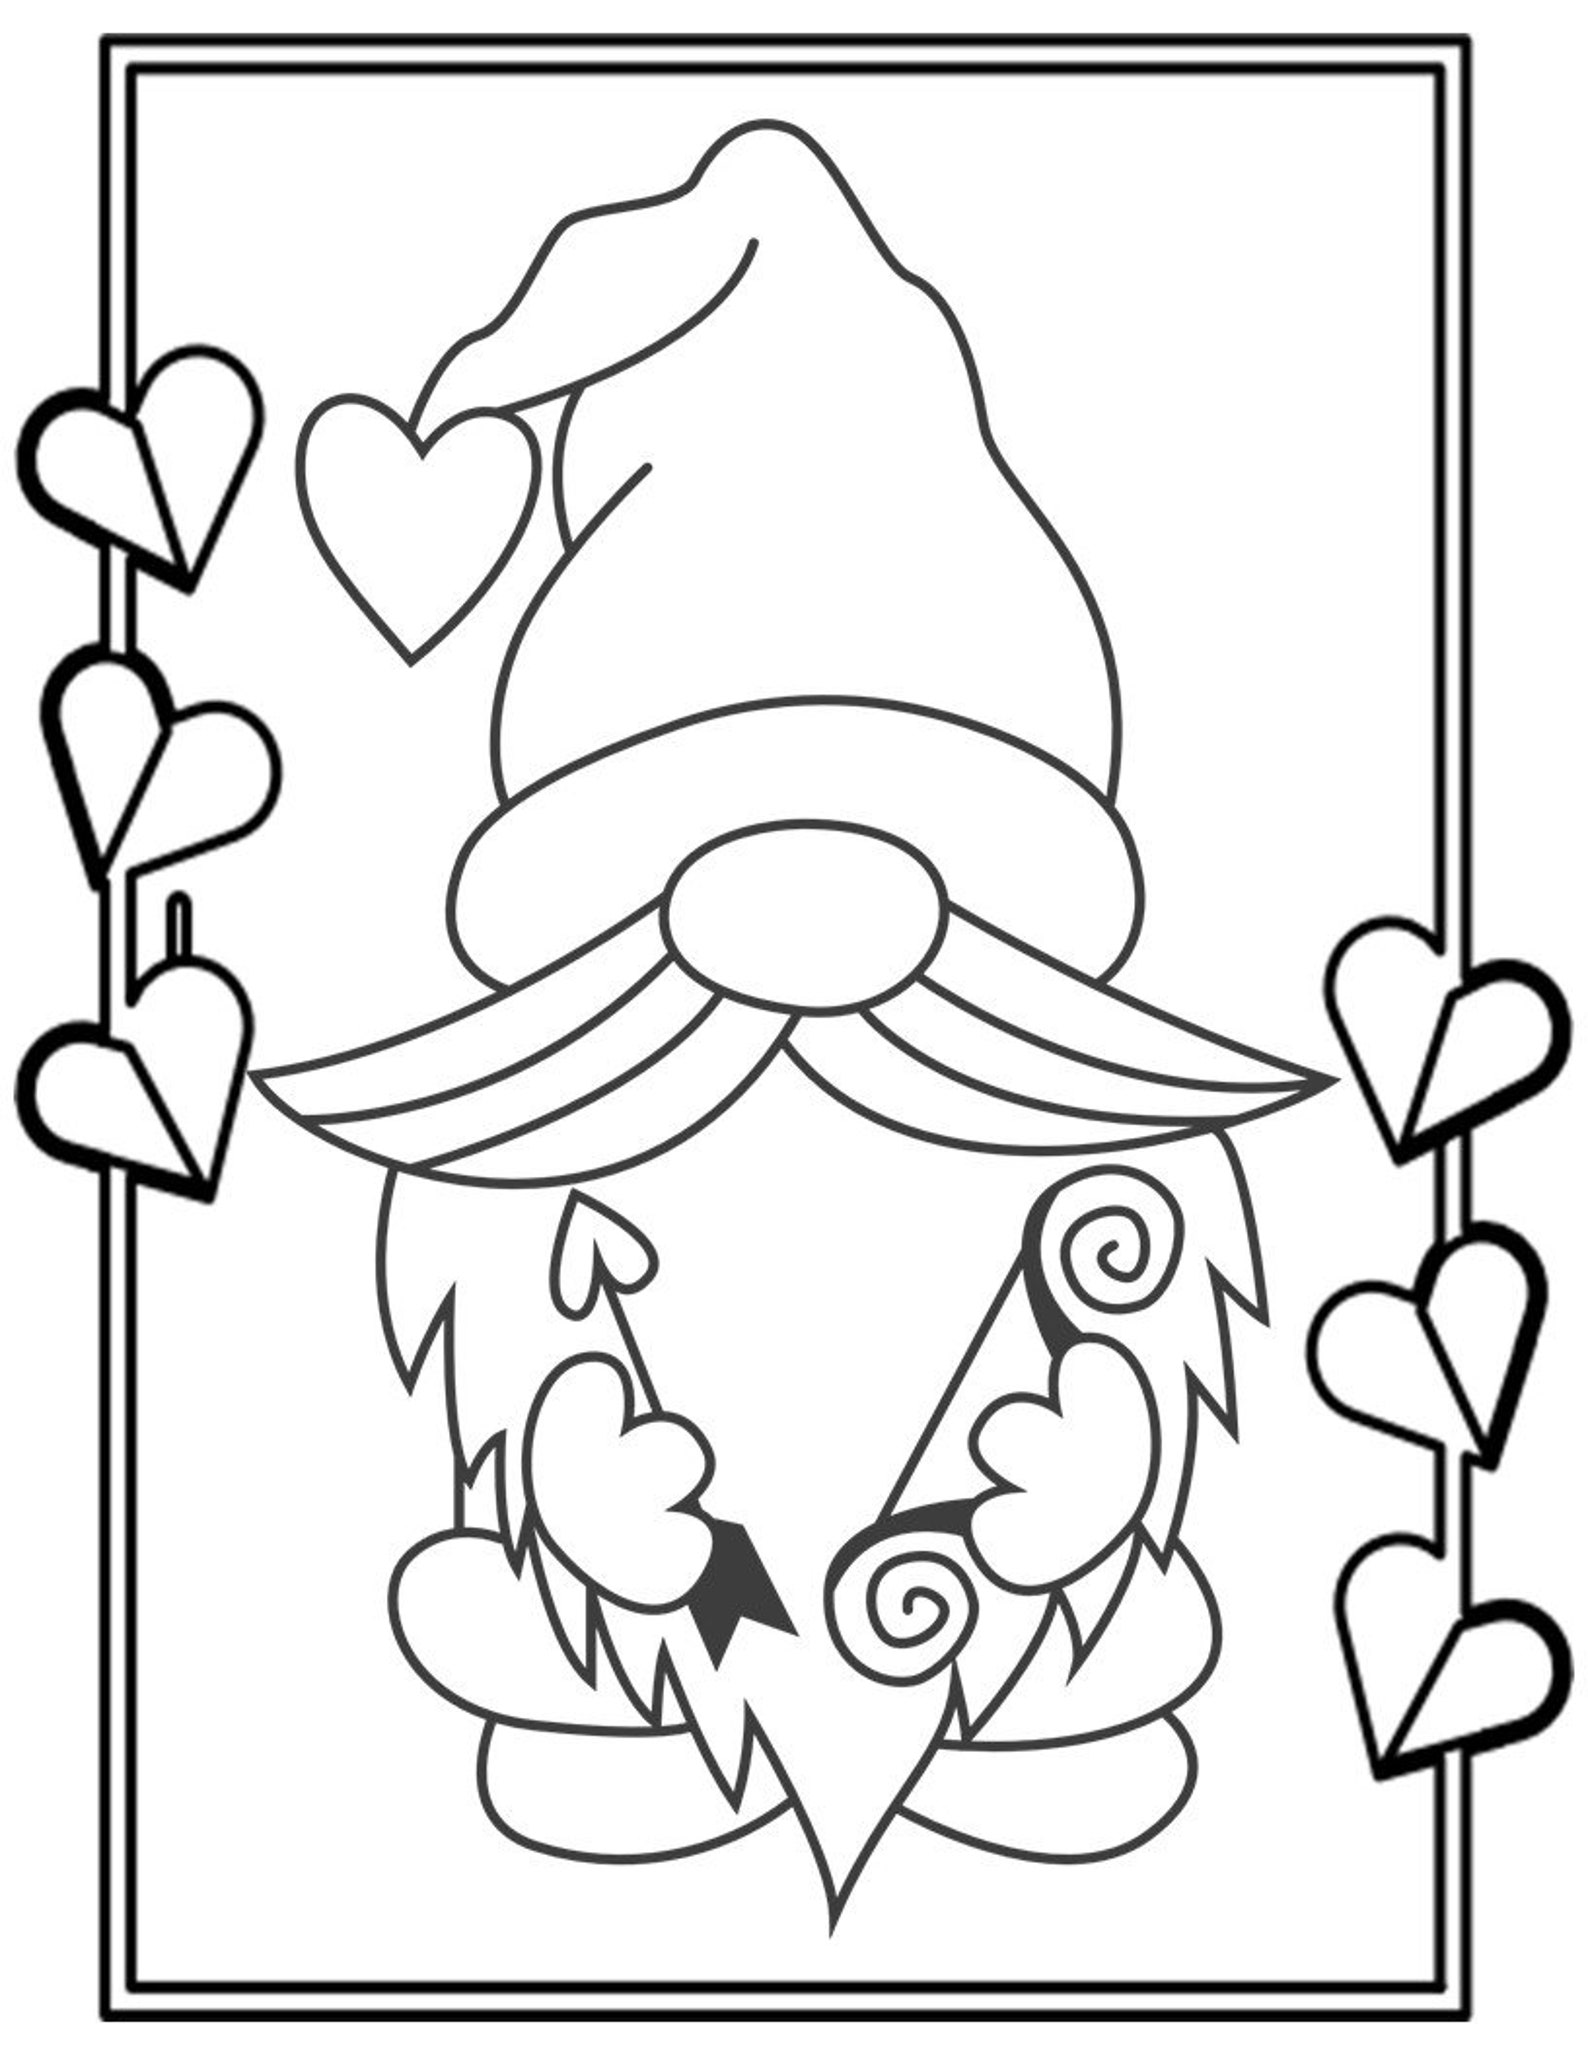 printable-valentine-gnome-coloring-pages-set-of-6-etsy-uk